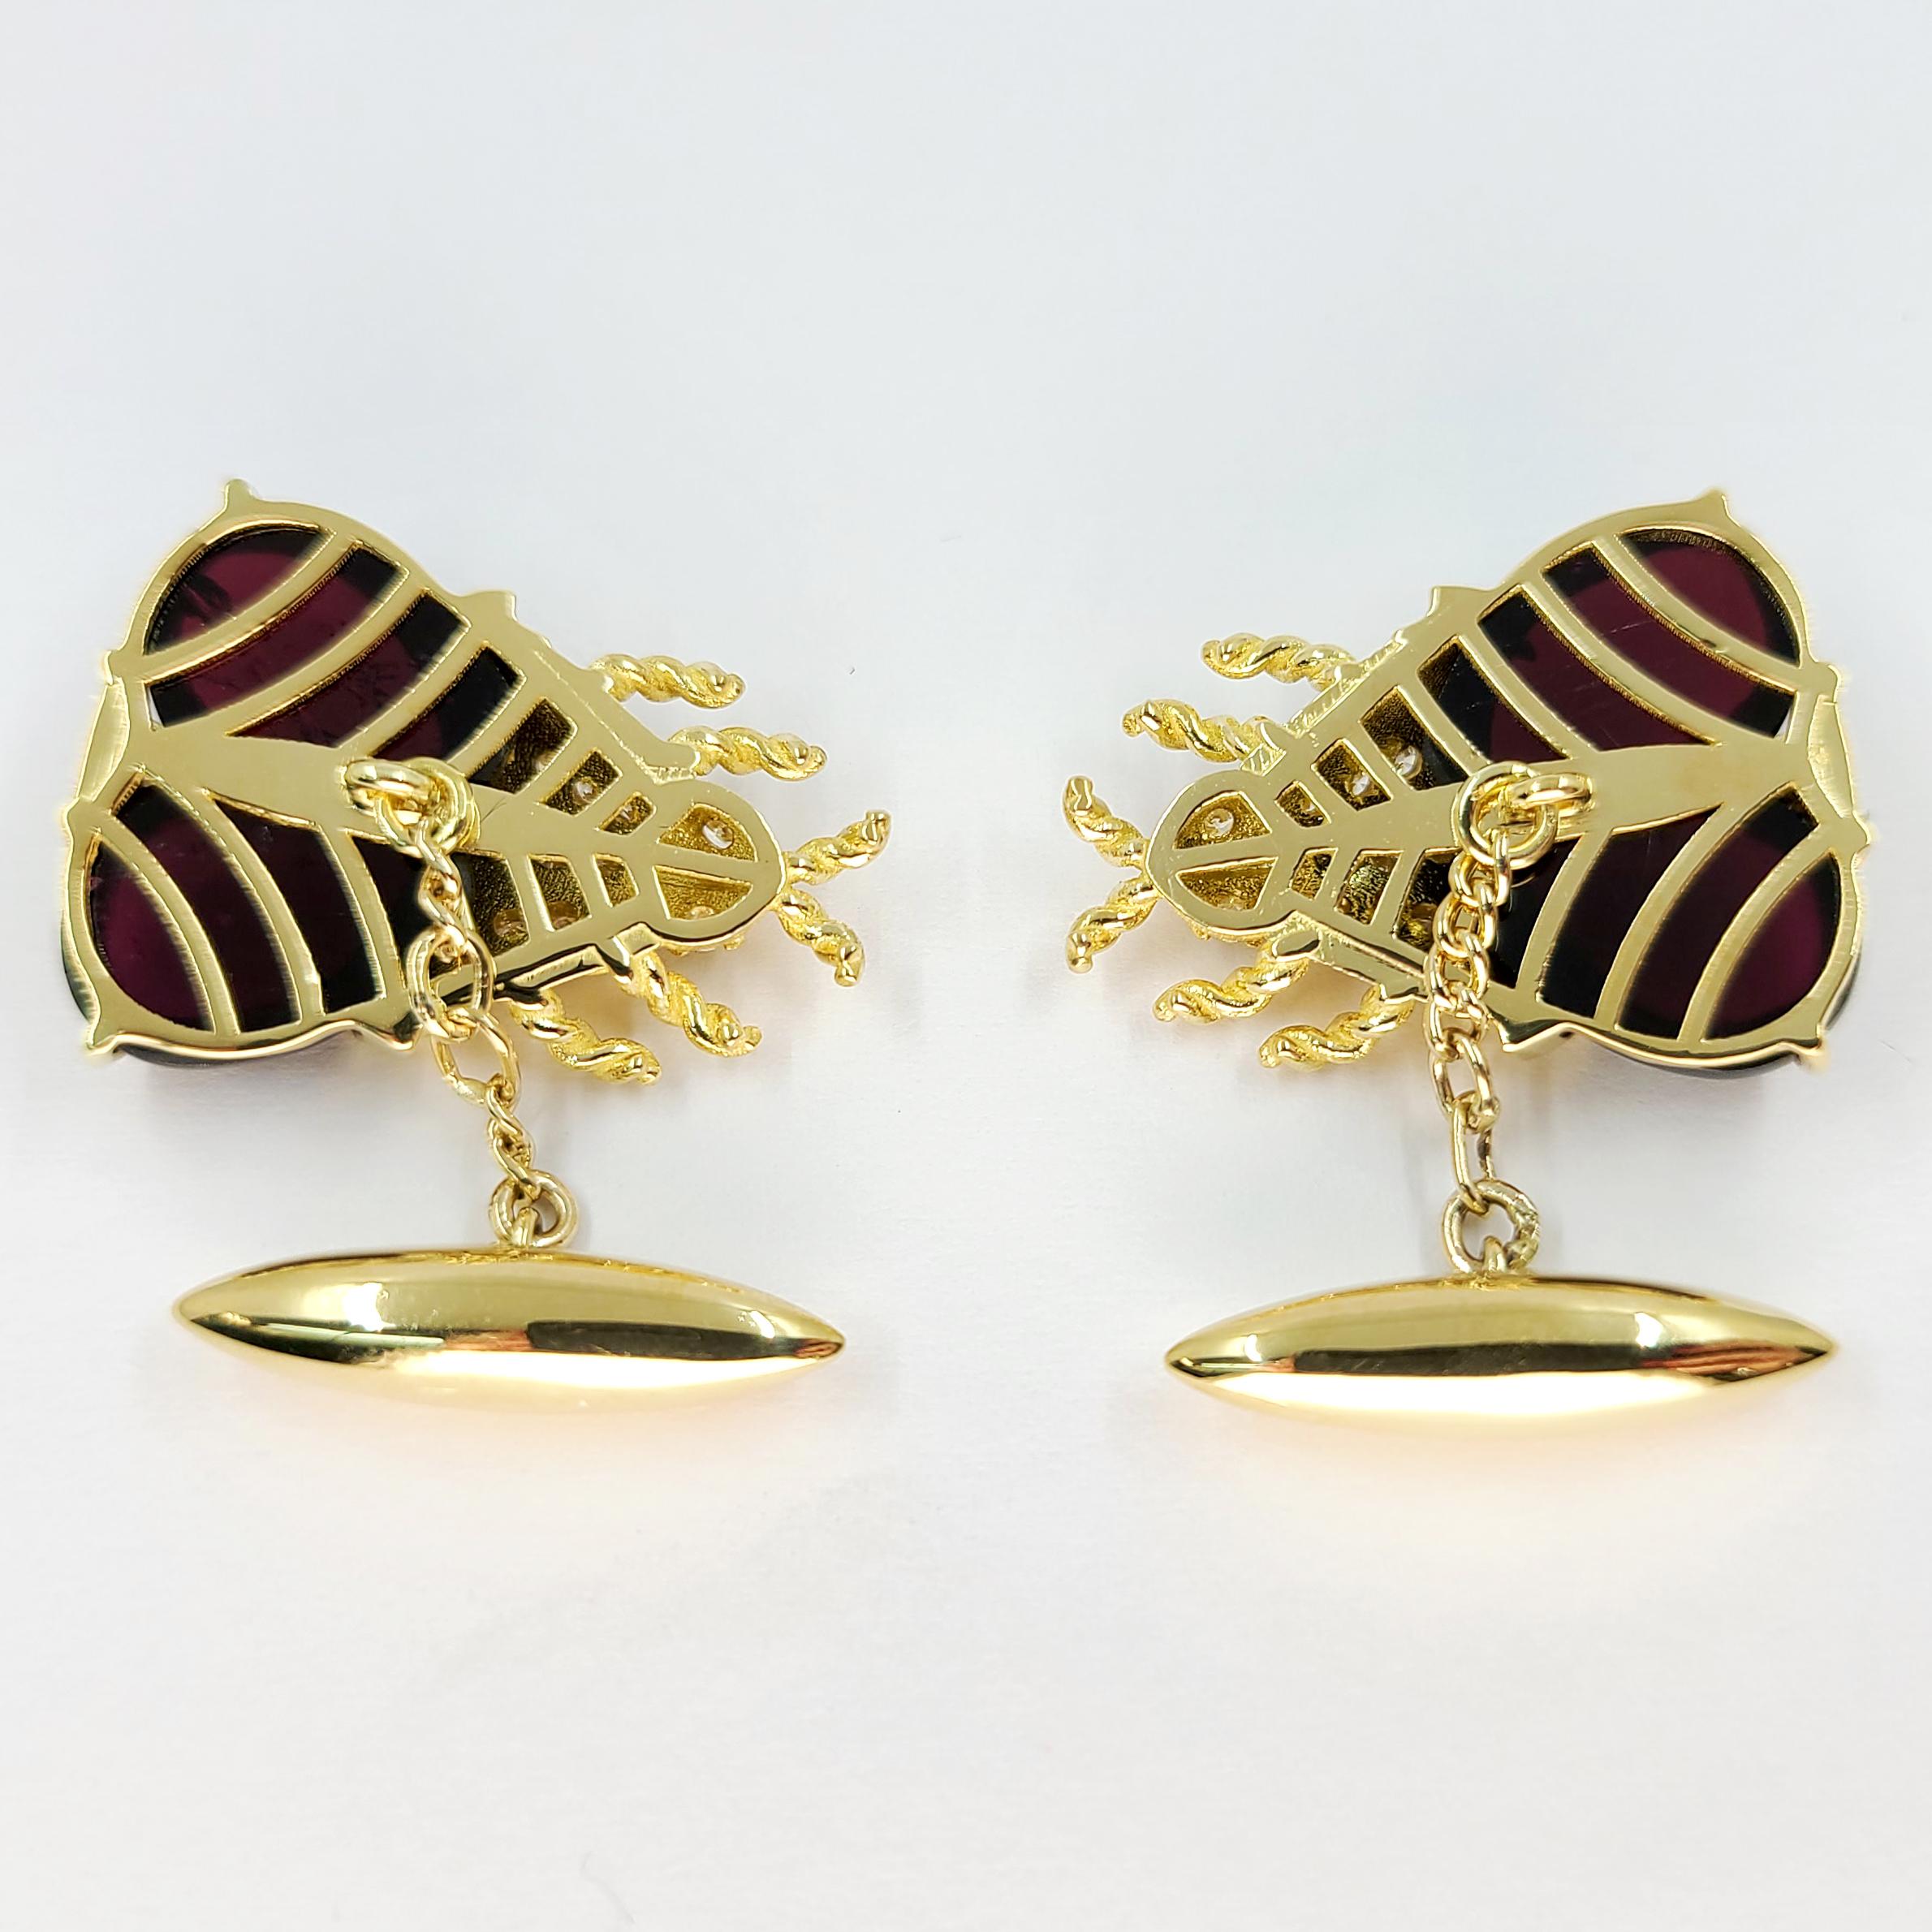 Beautifully Crafted 18 Karat Yellow Gold Beetle Cufflinks Featuring 4 Cabochon Garnets Weighing Approximately 10 Carats. 38 Round Brilliant Cut Diamonds of VS Clarity & G Color Total Approximately 1.50 Carats. Finished Weight is 26.3 Grams. Chain